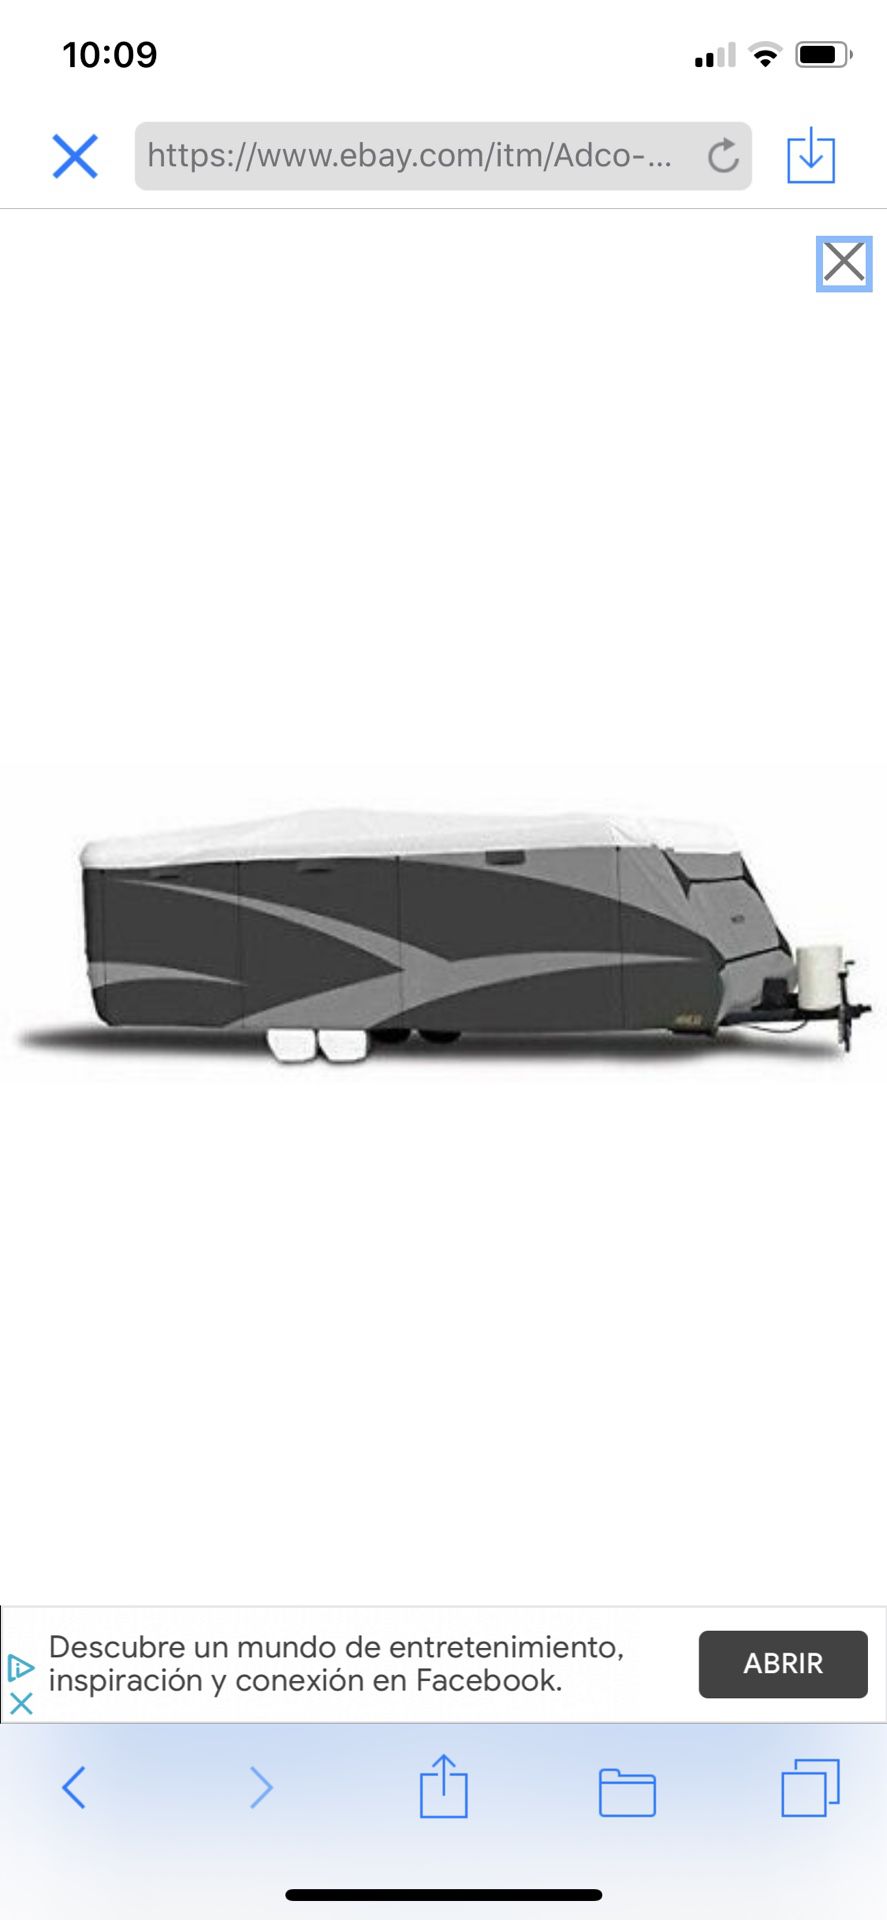 ADCO All Climate + Wind Designer Tyvek RV Cover - Travel Trailer, 20'1" - 22'. New. Valued at $392